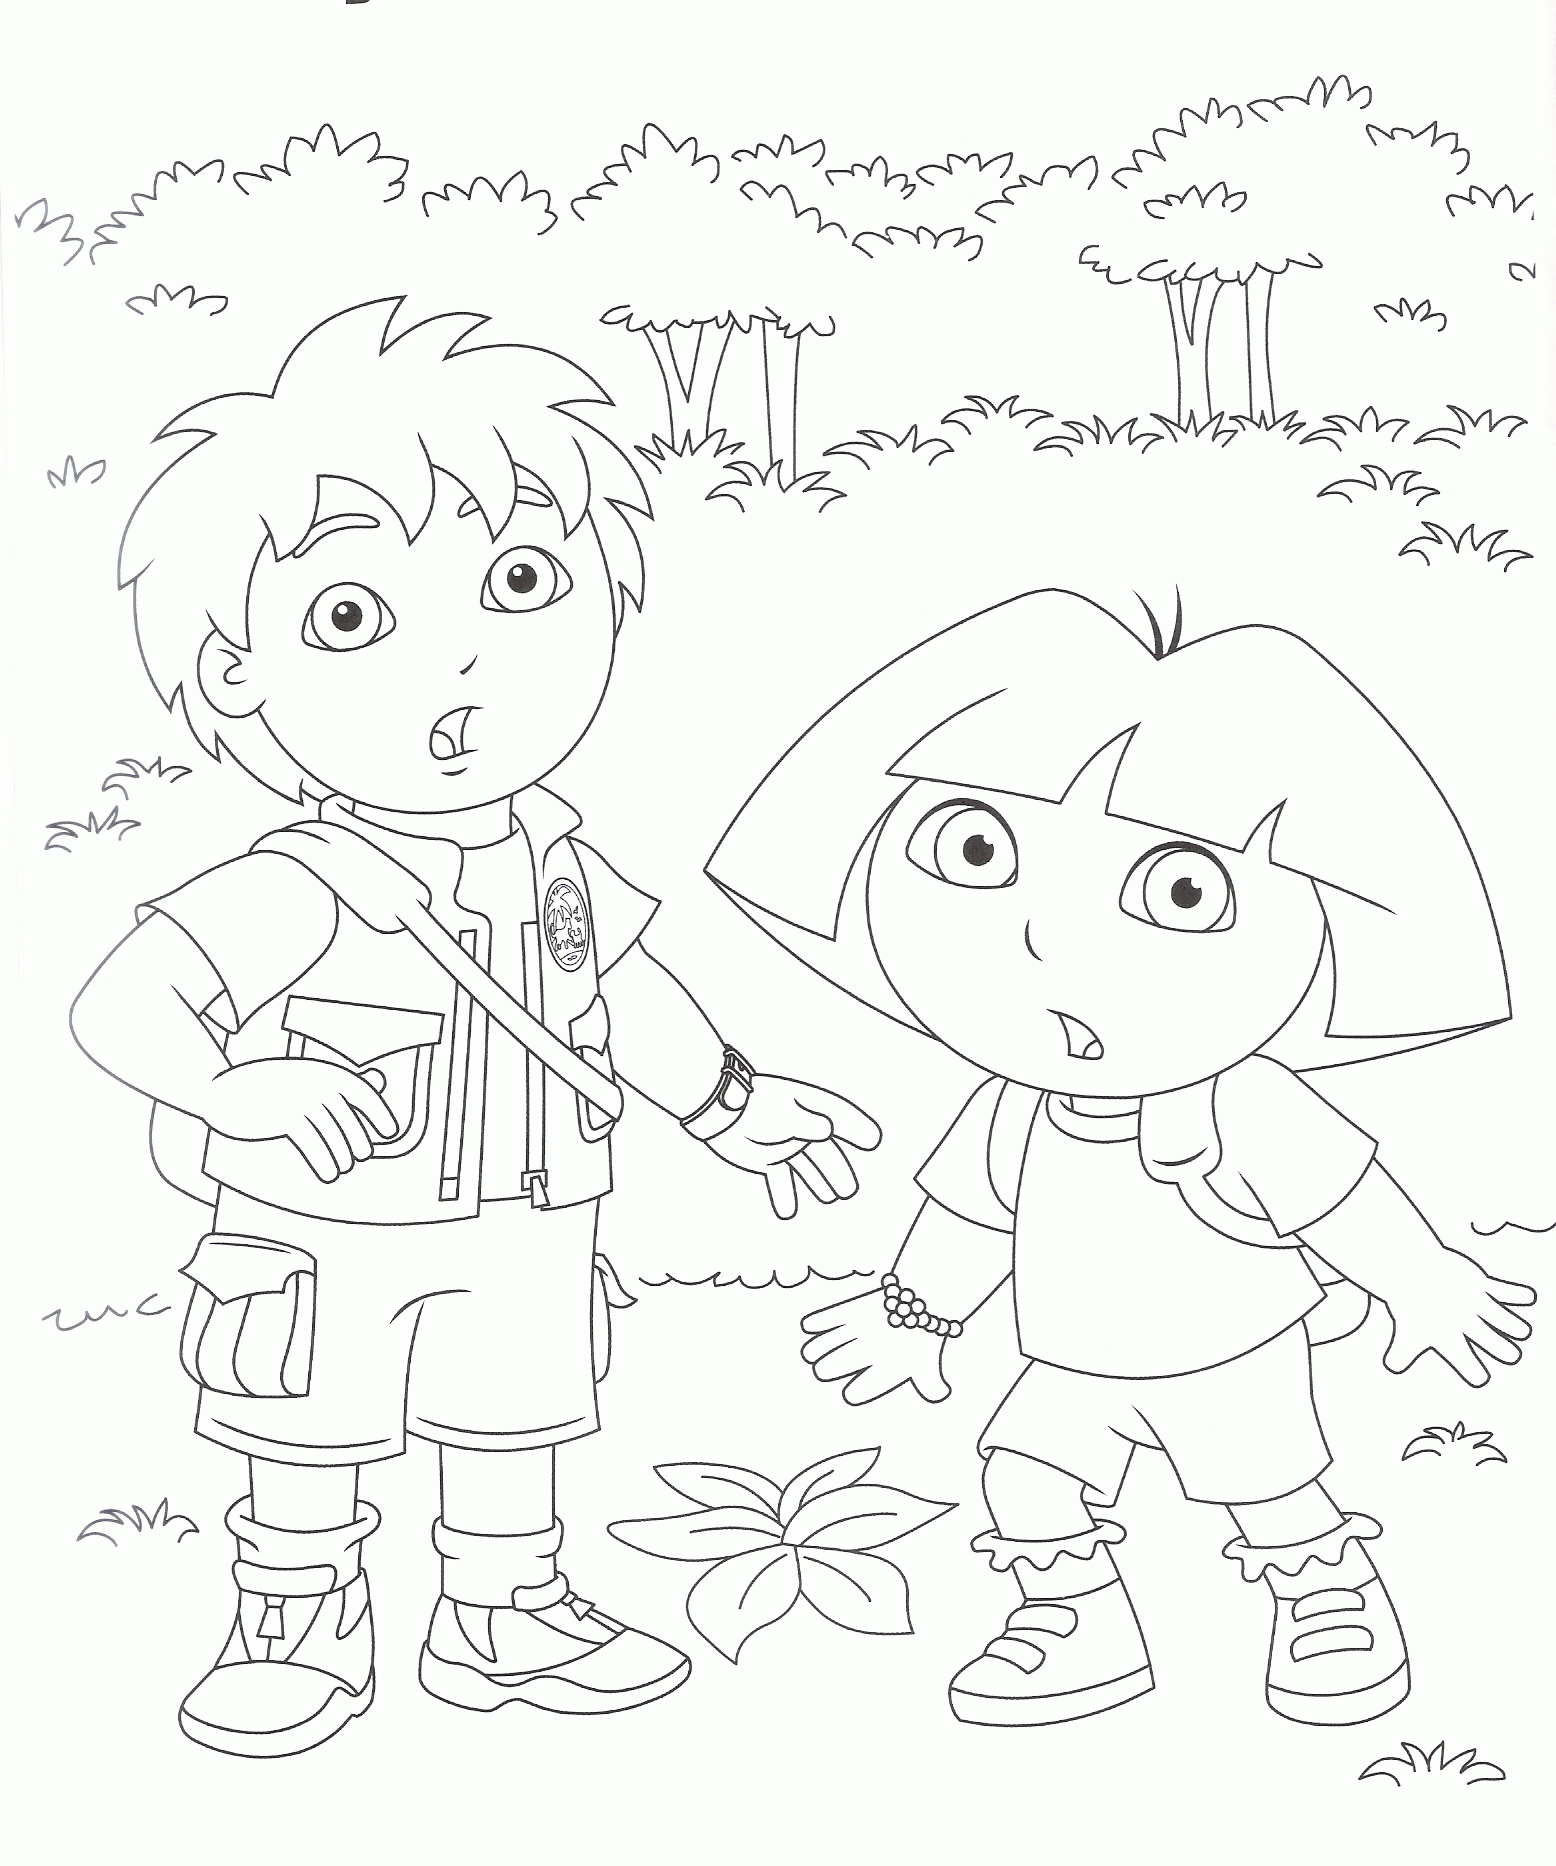 Diego and Dora coloring page